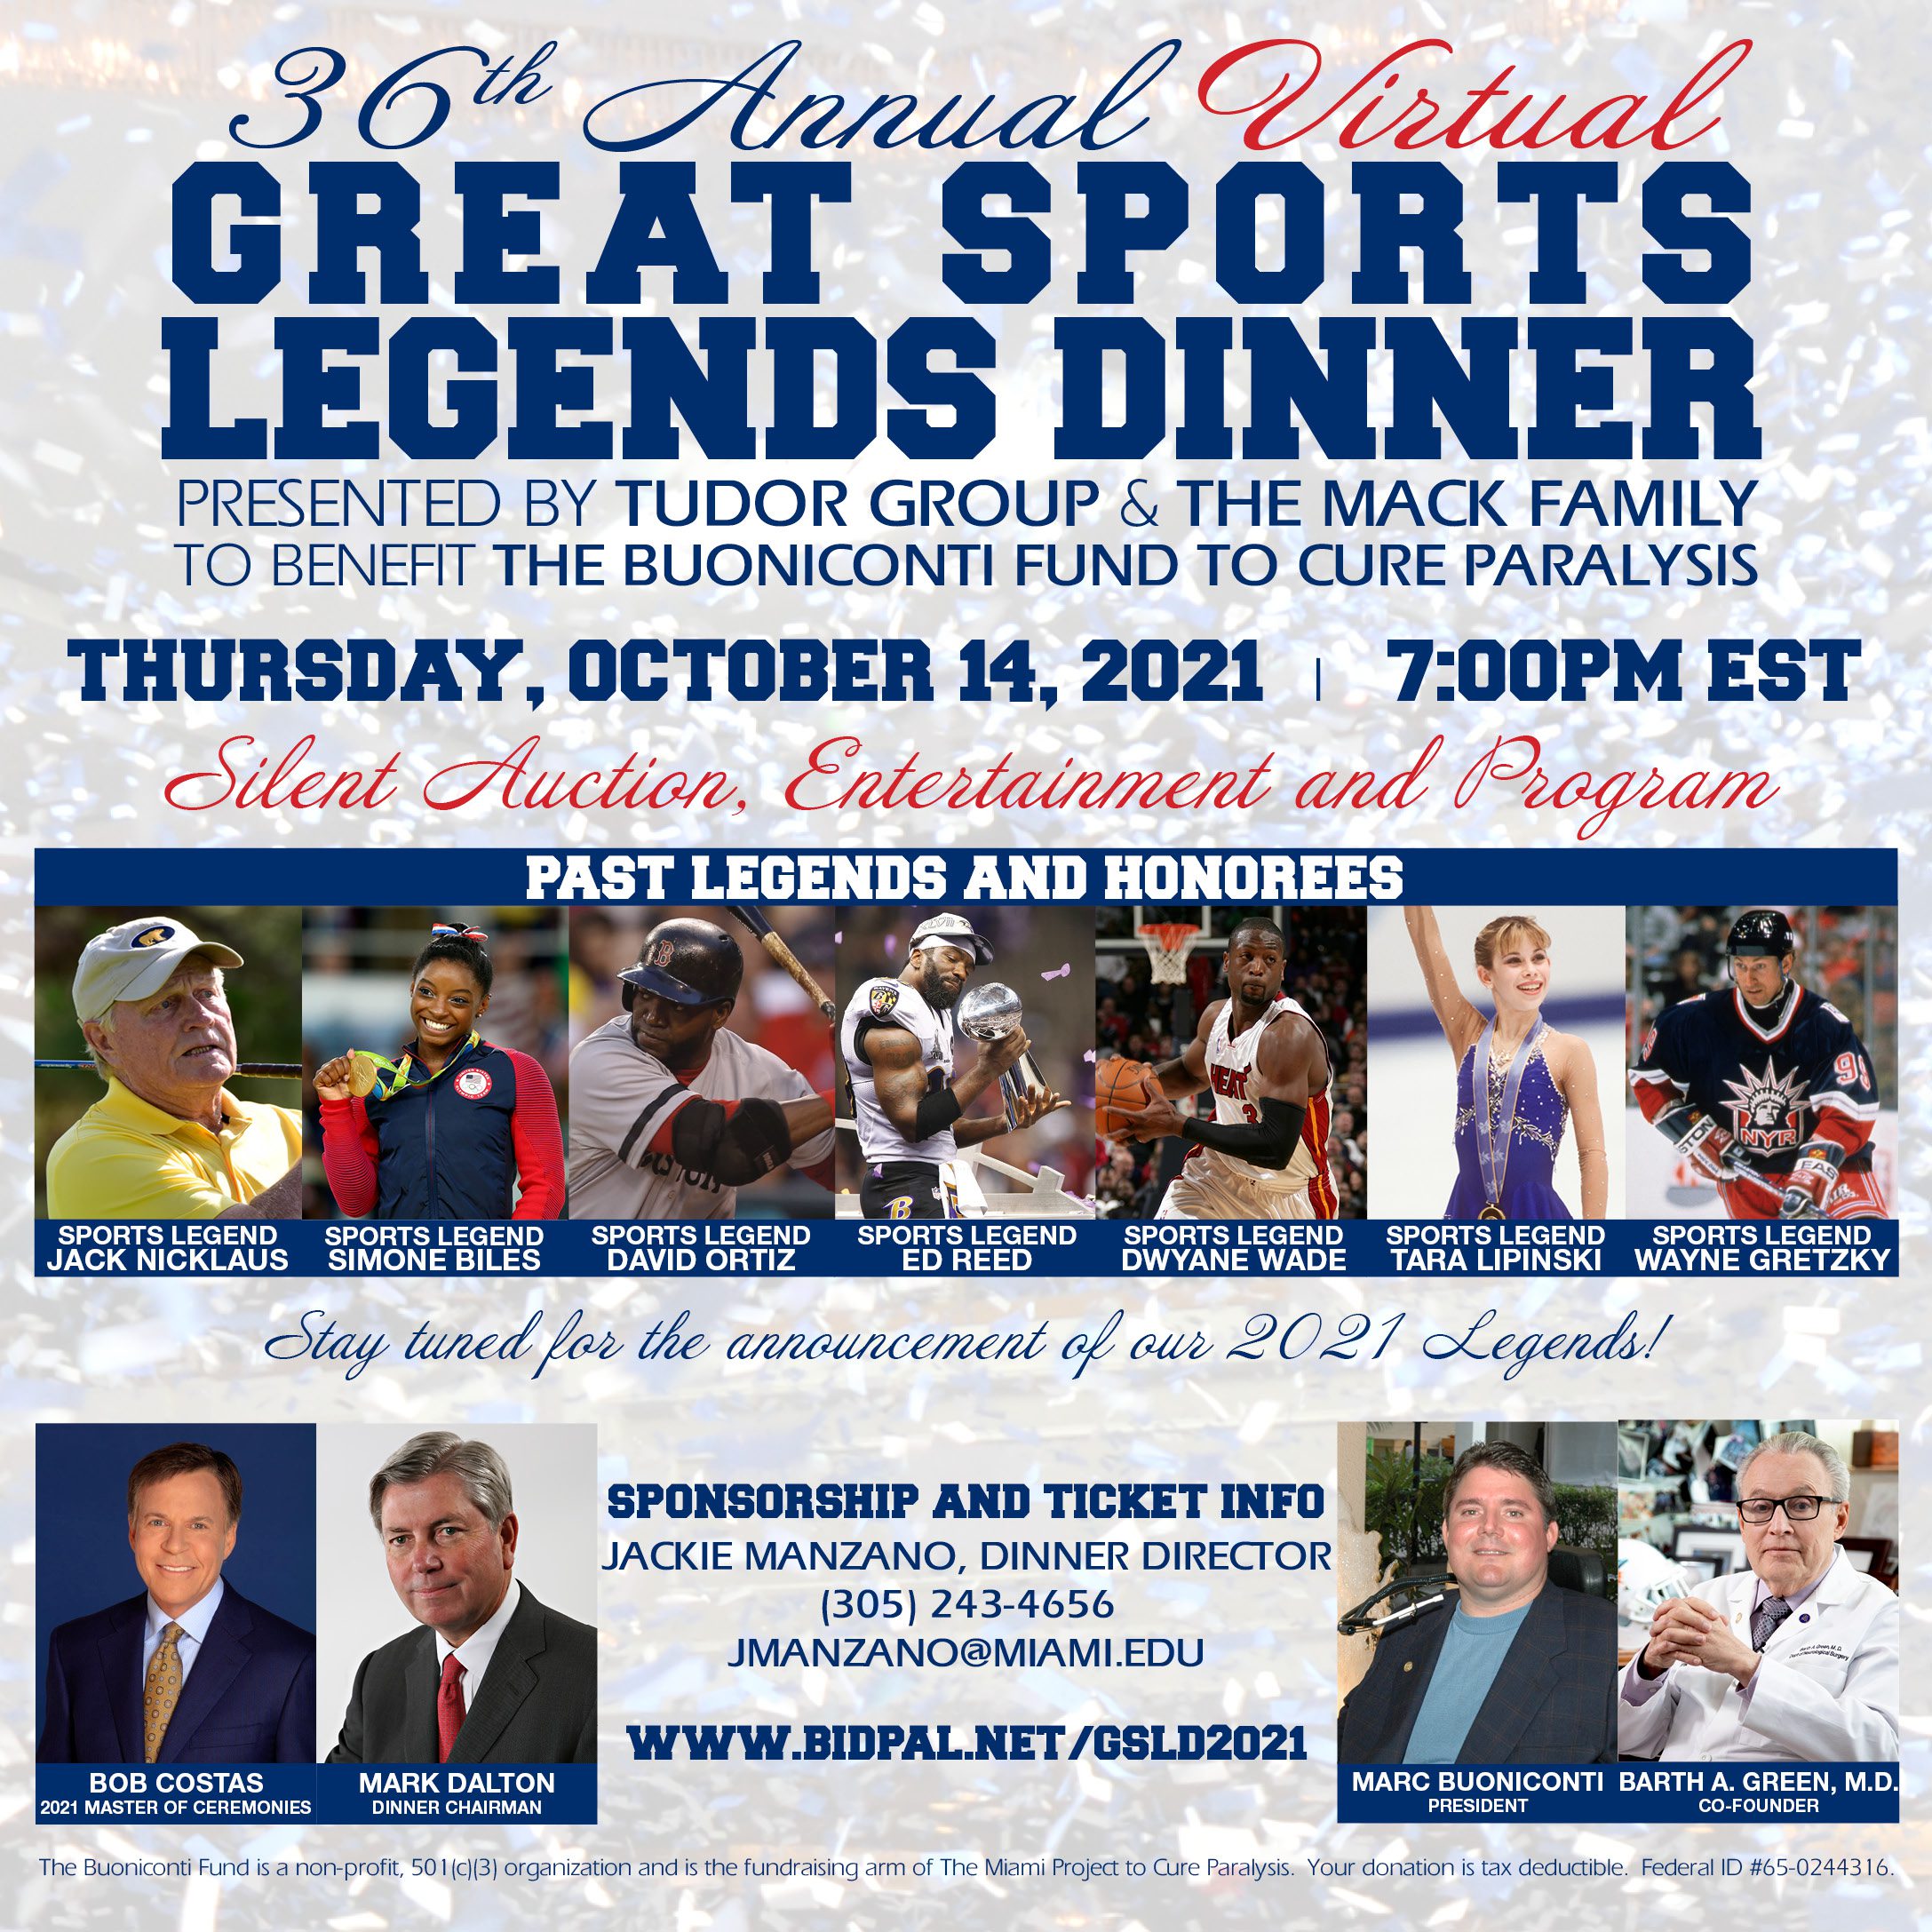 36th Annual Great Sports Legends Dinner presented by Tudor Group & The Mack Family